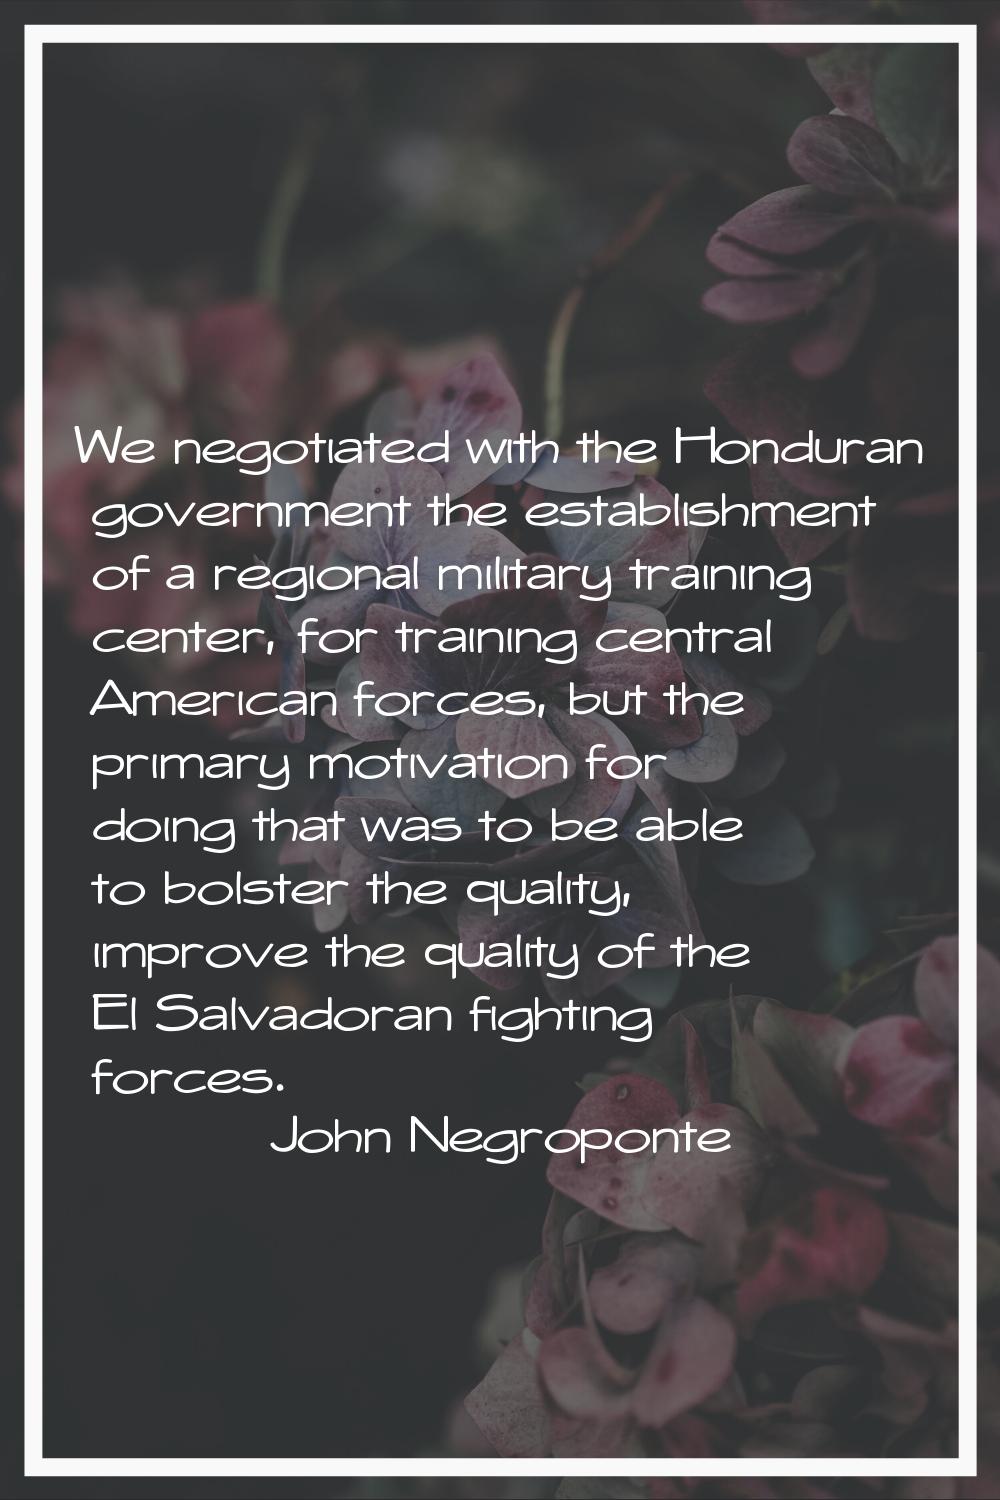 We negotiated with the Honduran government the establishment of a regional military training center